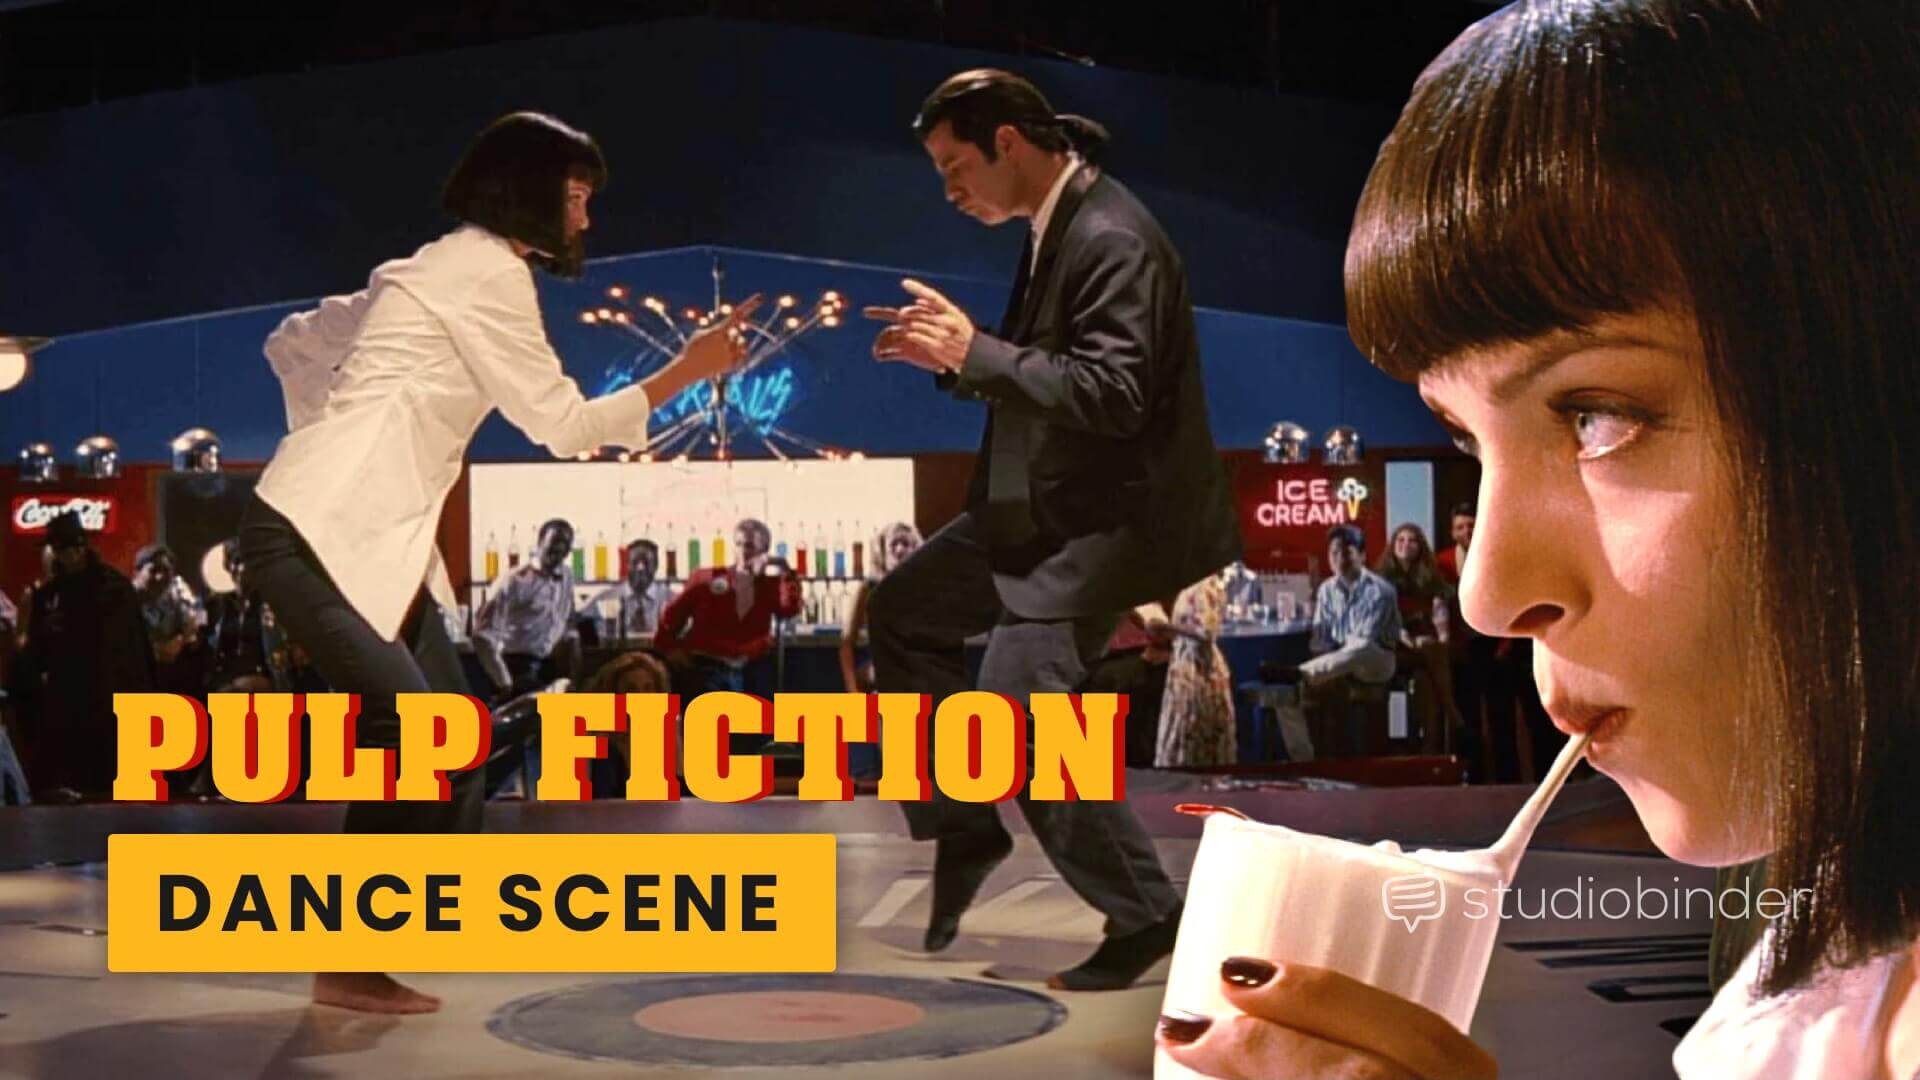 Pulp Fiction Dance Scene — What Makes This Scene So Great?